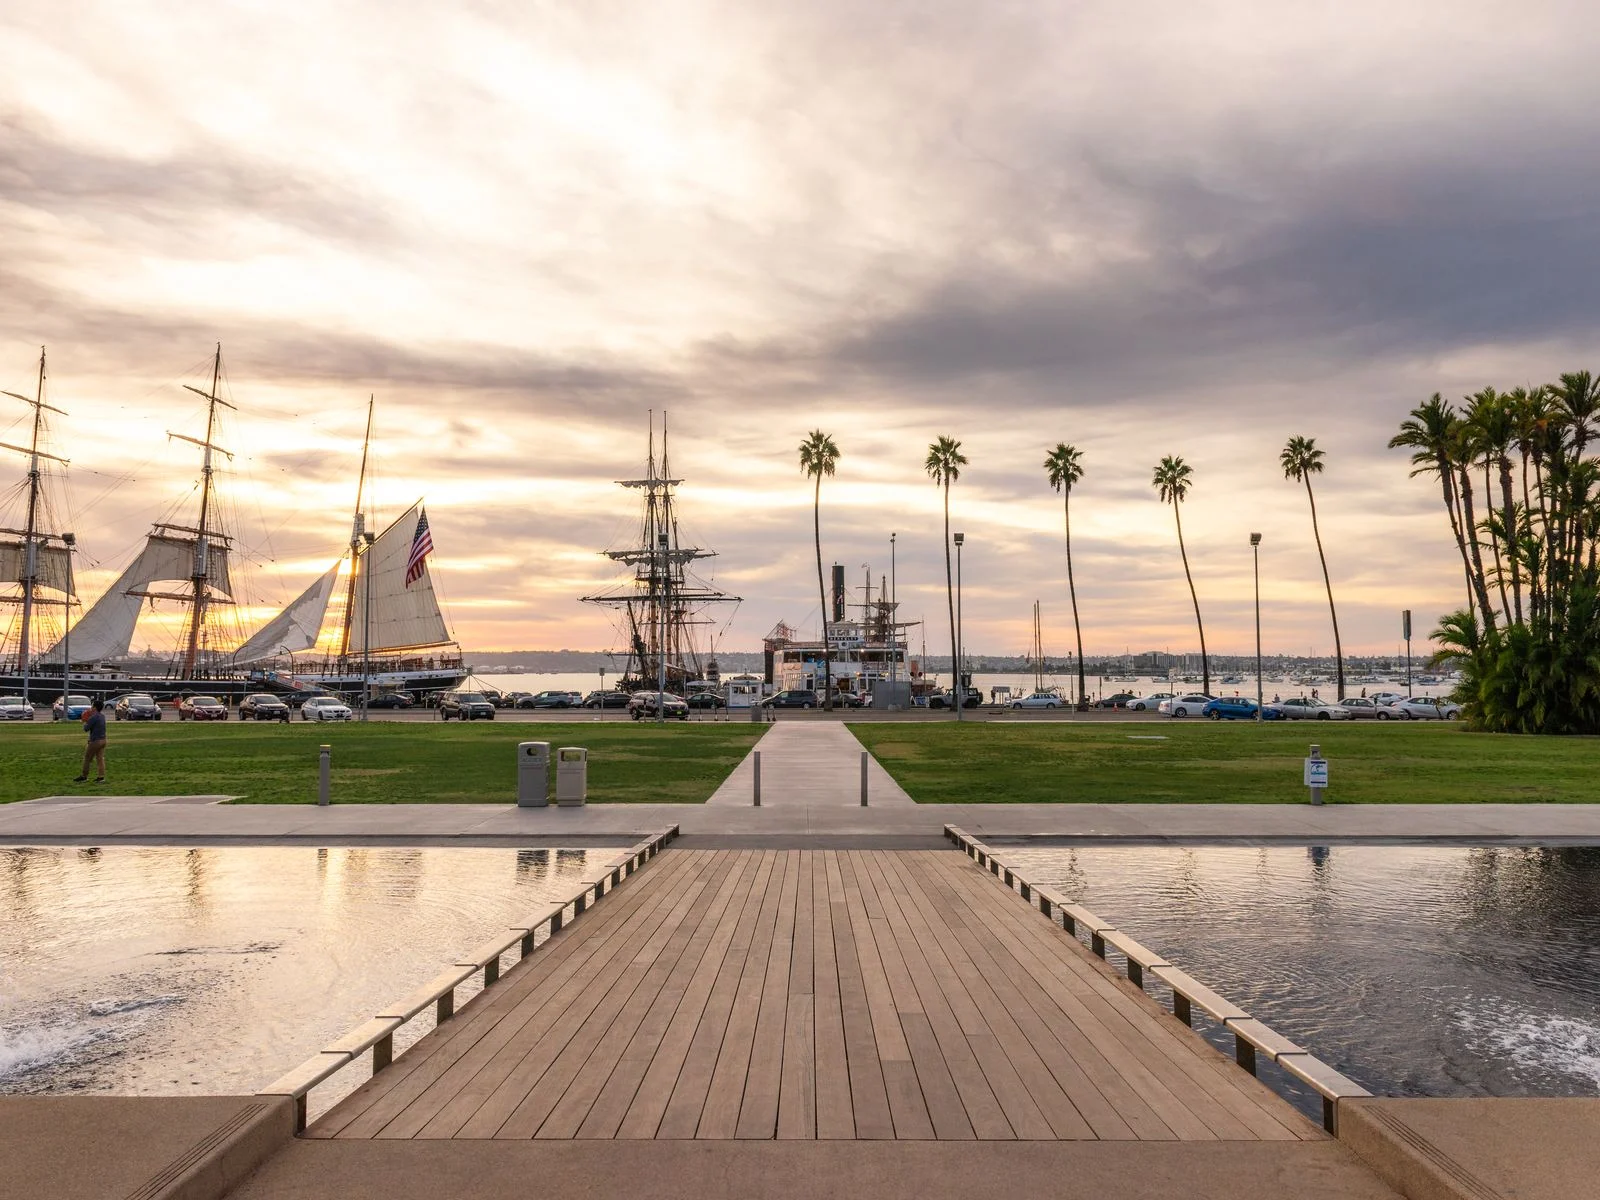 Road to the harbor over the water with sailing ships in the background during the best time to visit San Diego